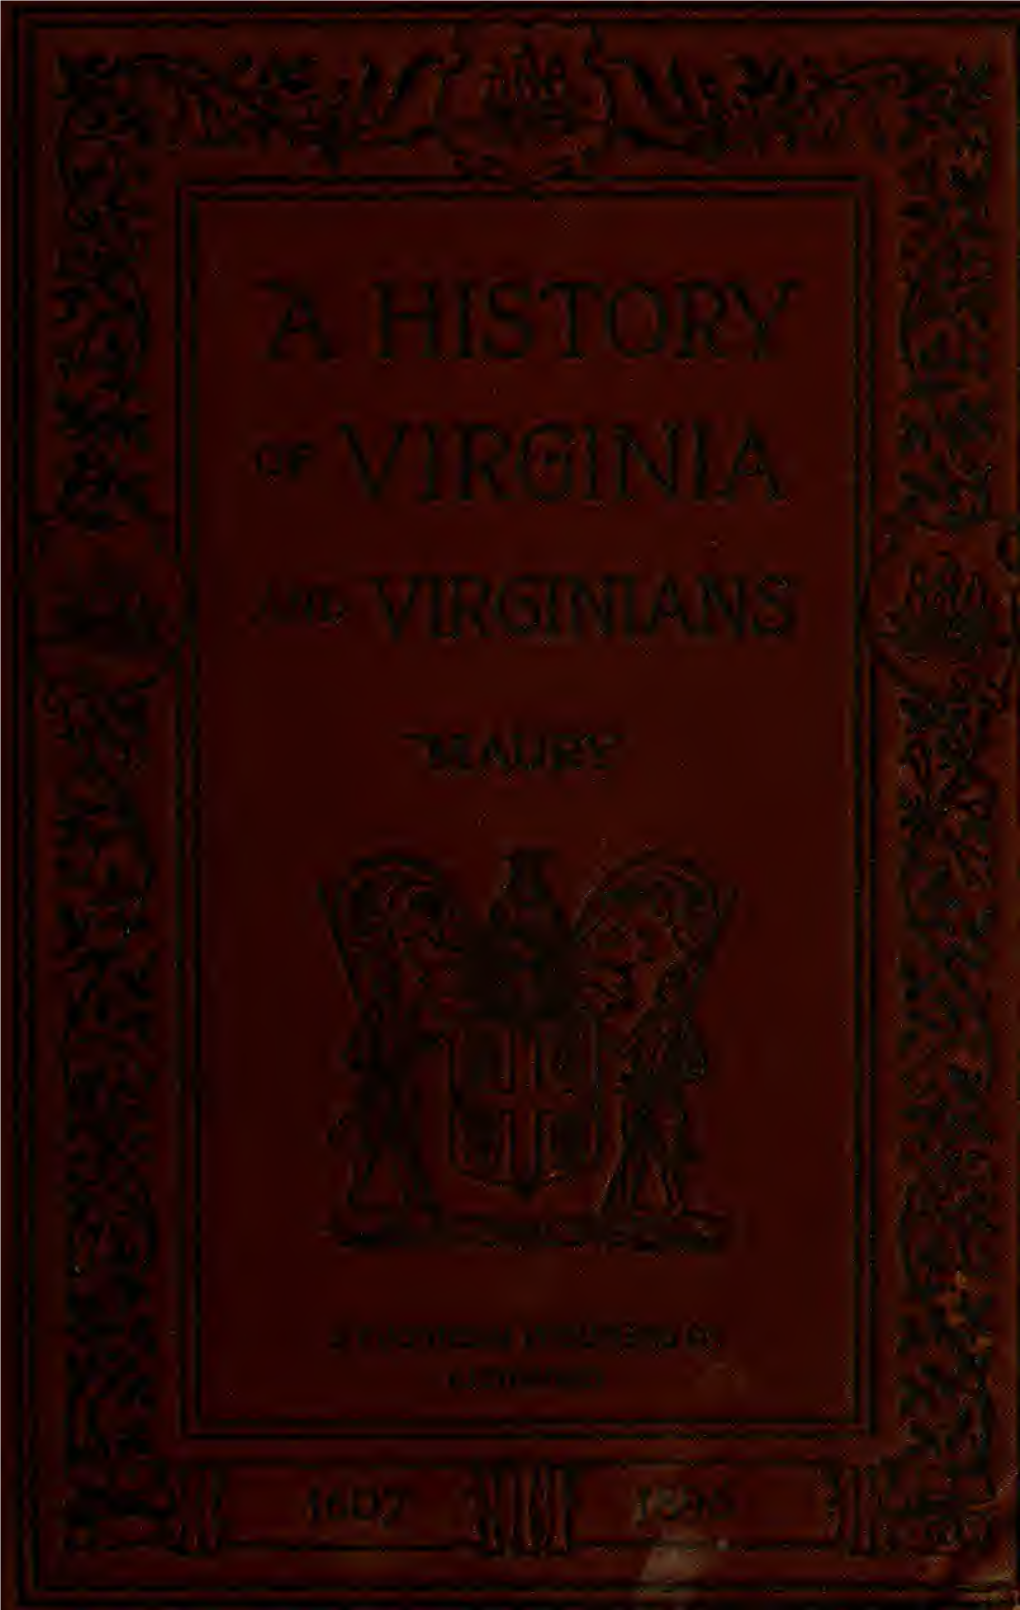 A Young People's History of Virginia and Virginians